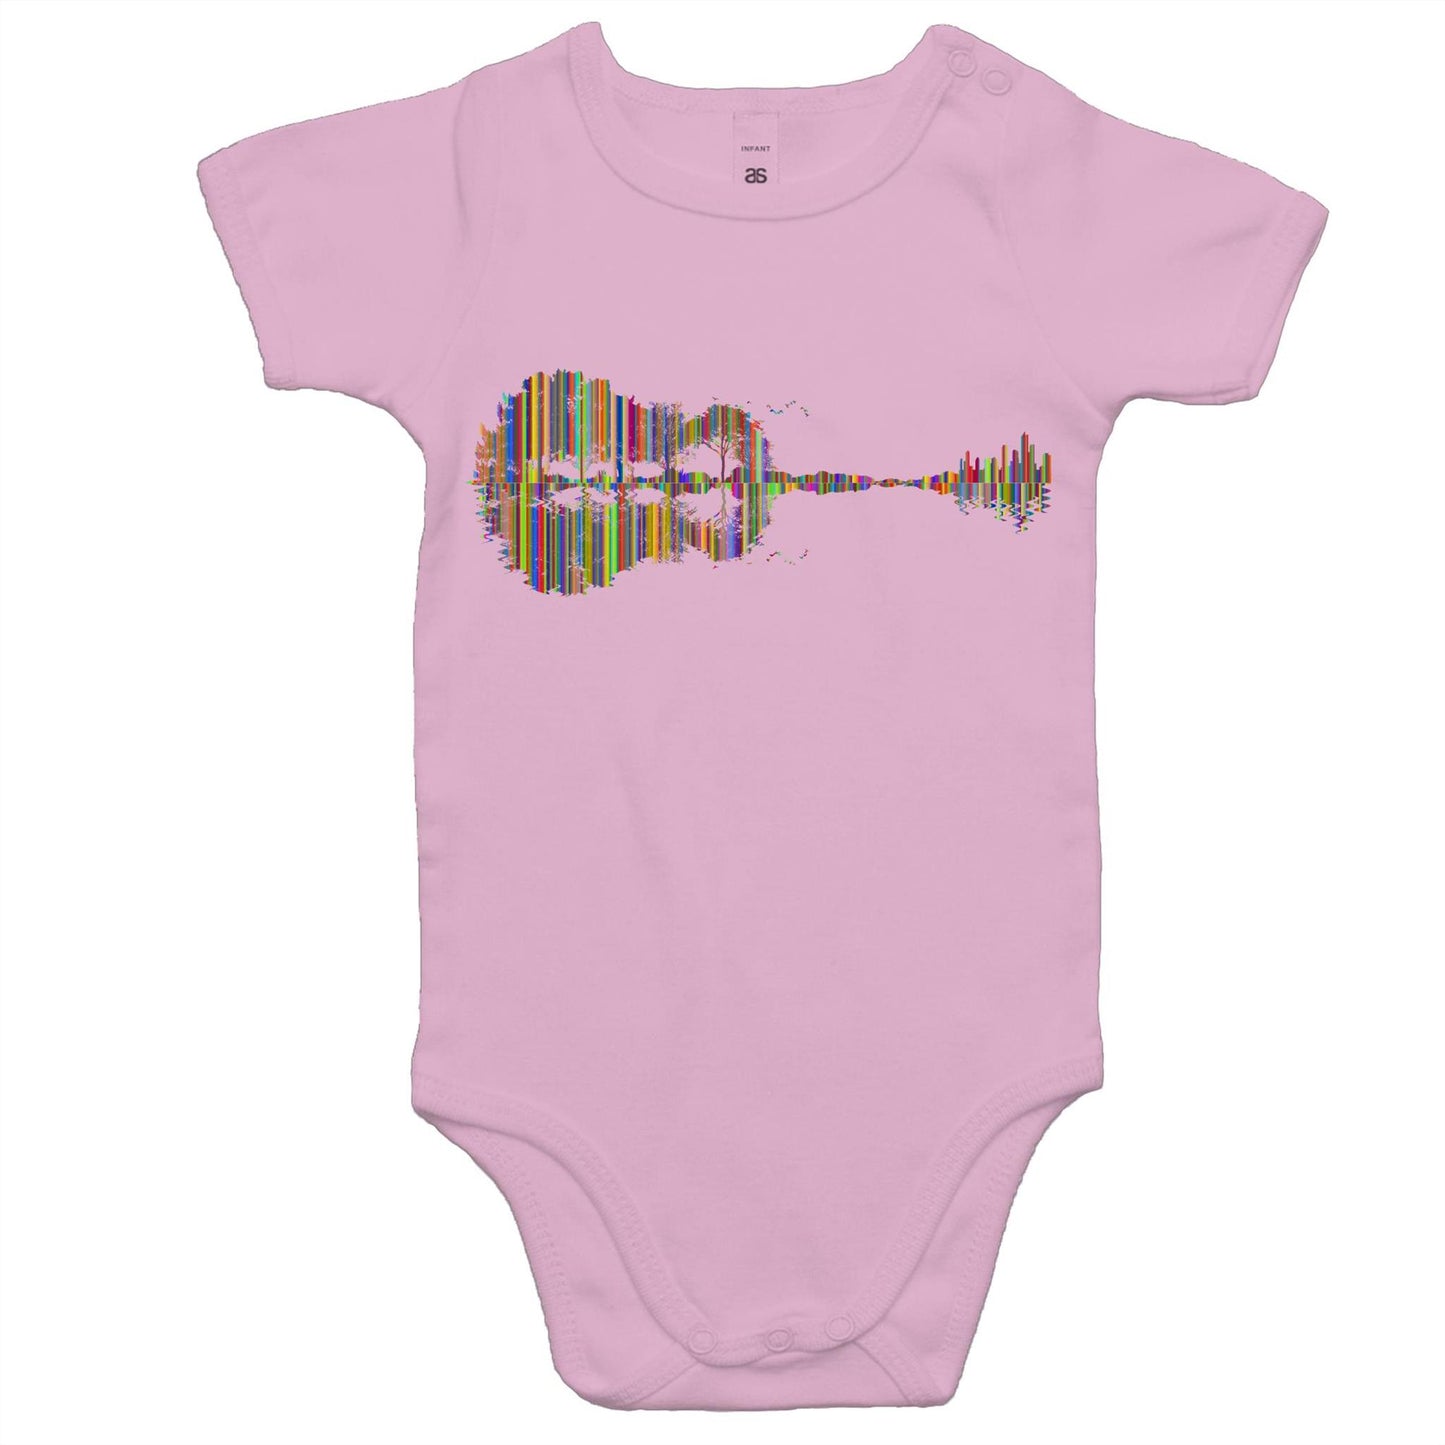 Guitar Reflection In Colour - Baby Bodysuit Pink Baby Bodysuit Music